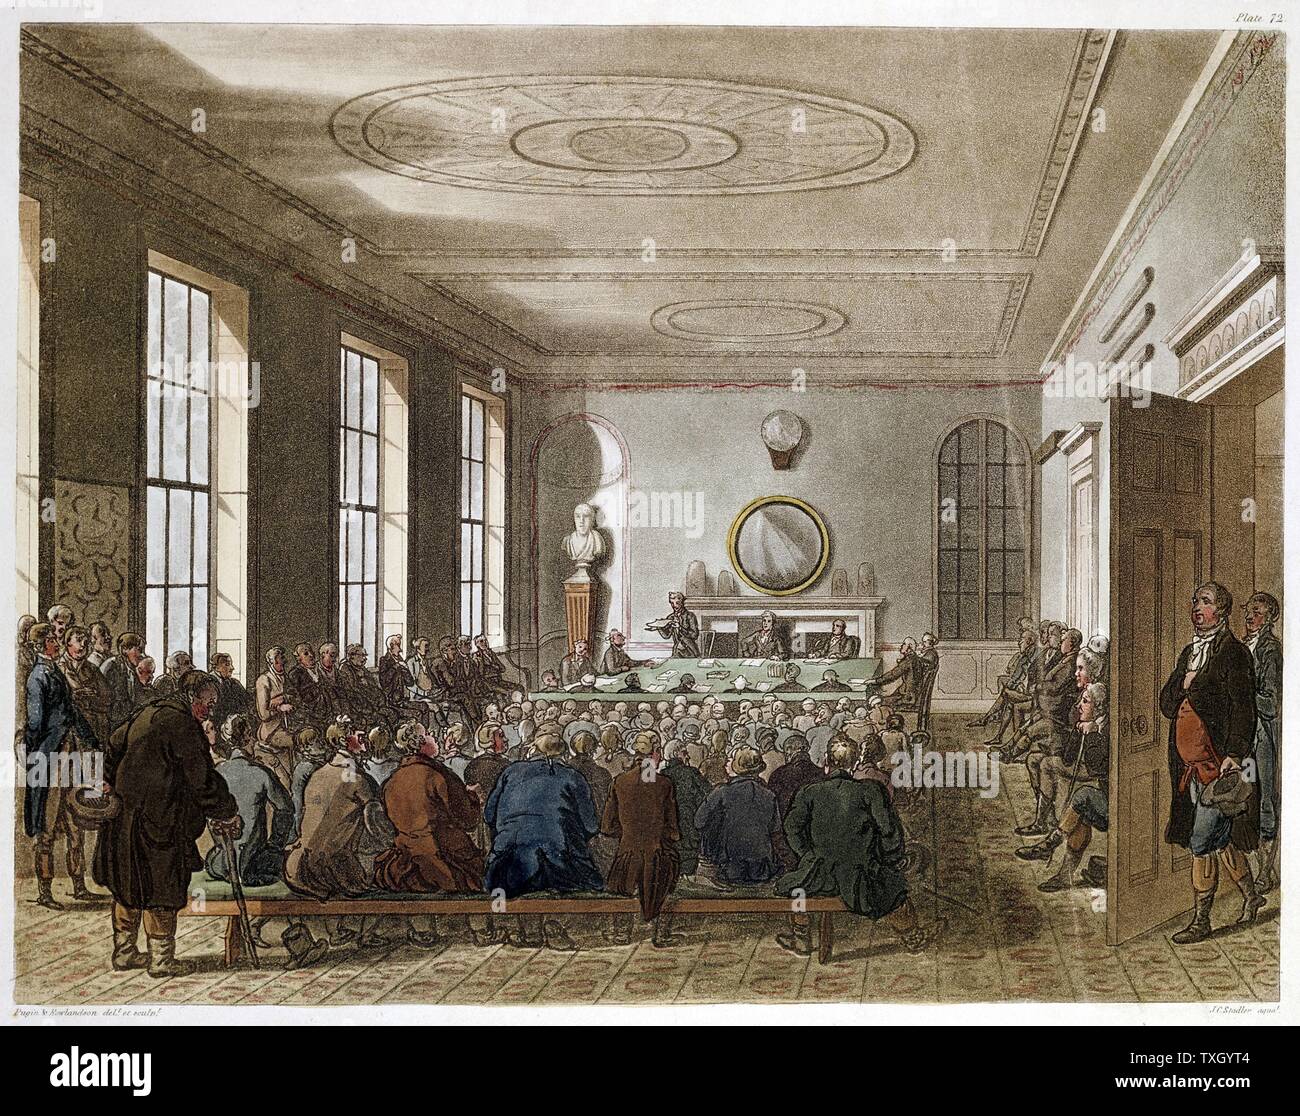 Meeting of the Agricultural Society, London. Illustration by Pugin and Rowlandson from 'Microcosm of London'  Ackermann, London 1808-10. Agricultural improvements in practice and machinery advanced greatly in late 18th and early 19th centuries helped by Societies such as this. Aquatint Stock Photo